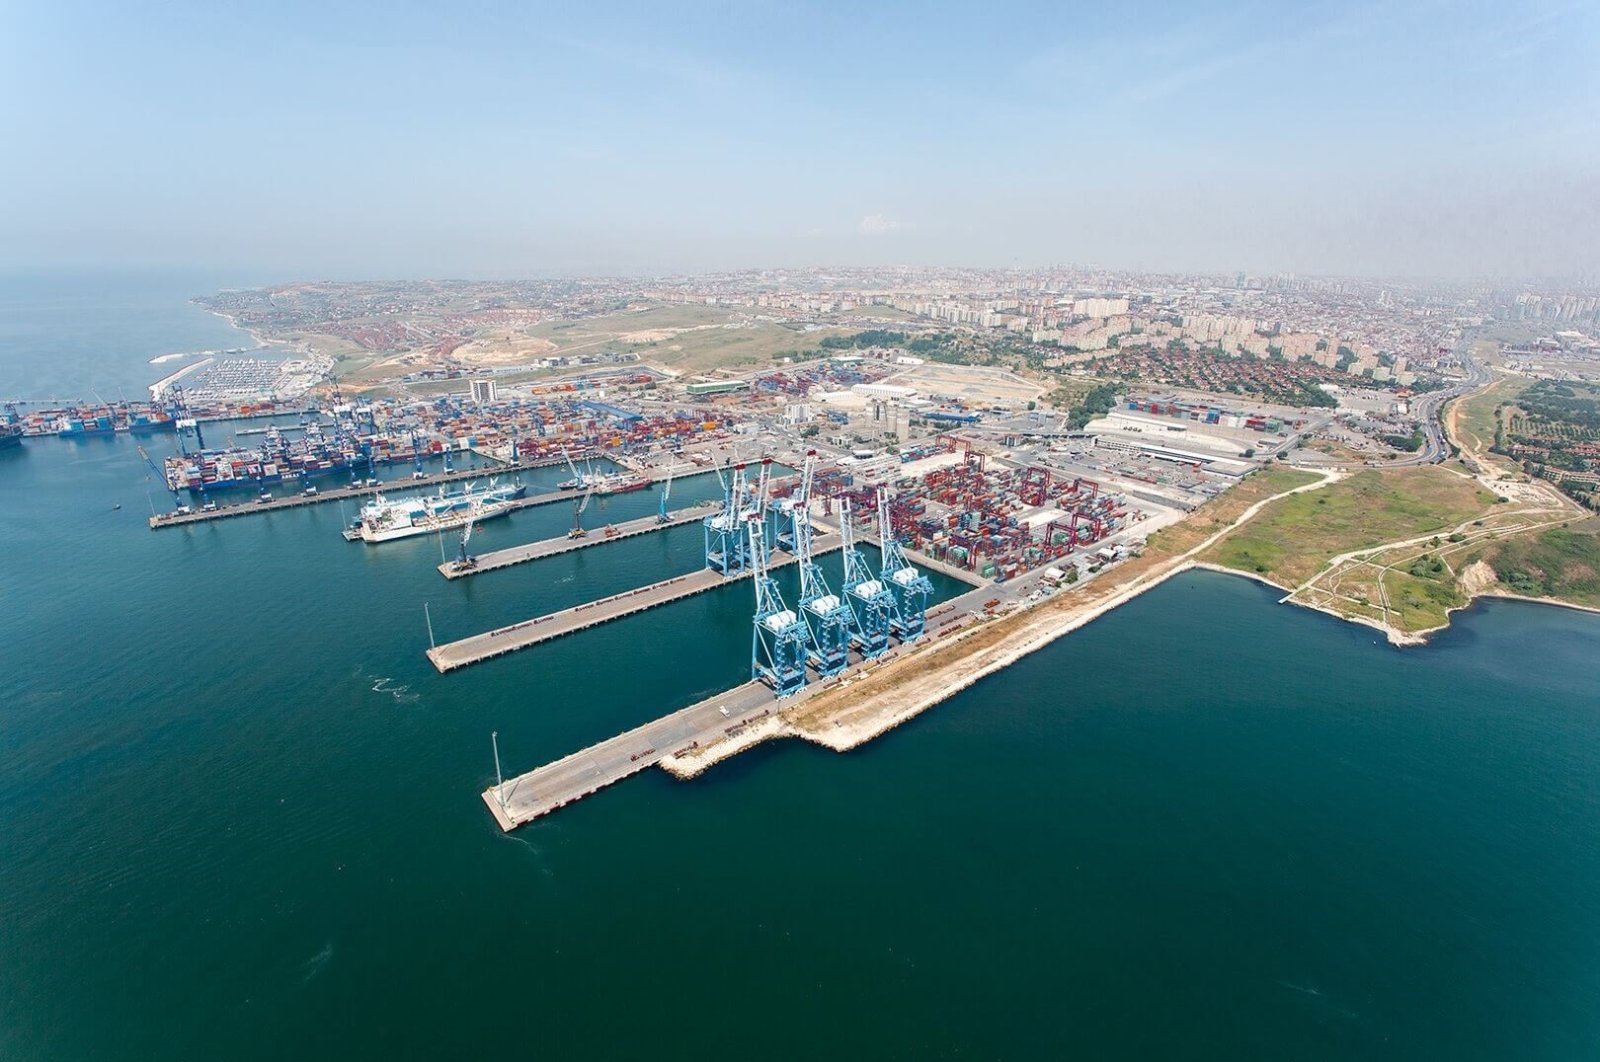 Containers and ships are seen at Kumport, one of Turkey's largest ports, in Istanbul. (Photo courtesy of Kumport)